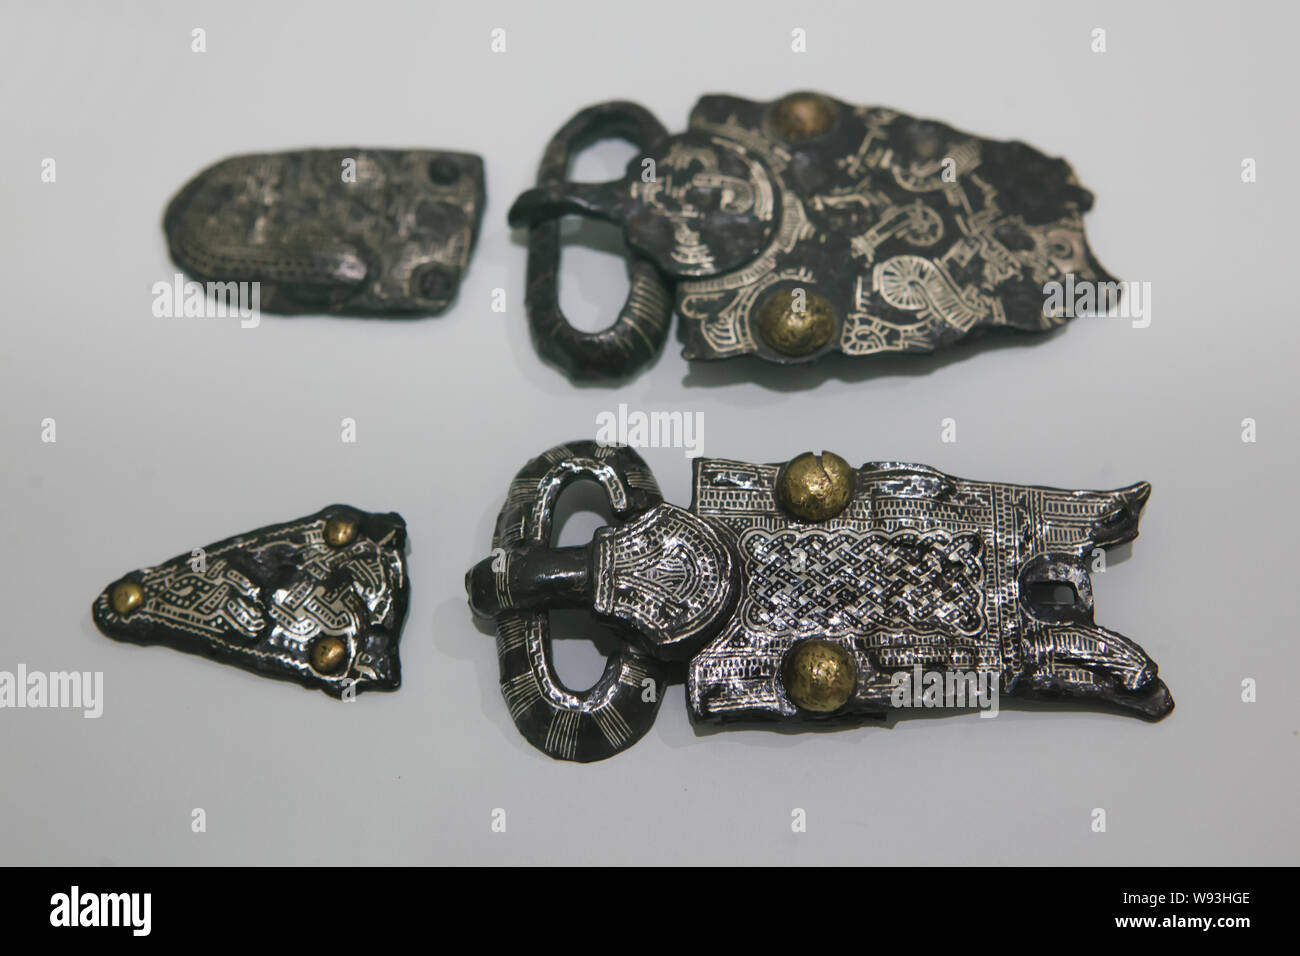 Merovingian iron and silver damascened harness parts dated from the 7th century AD found in Colmar on display in the Unterlinden Museum (Musée Unterlinden) in Colmar, Alsace, France. Stock Photo